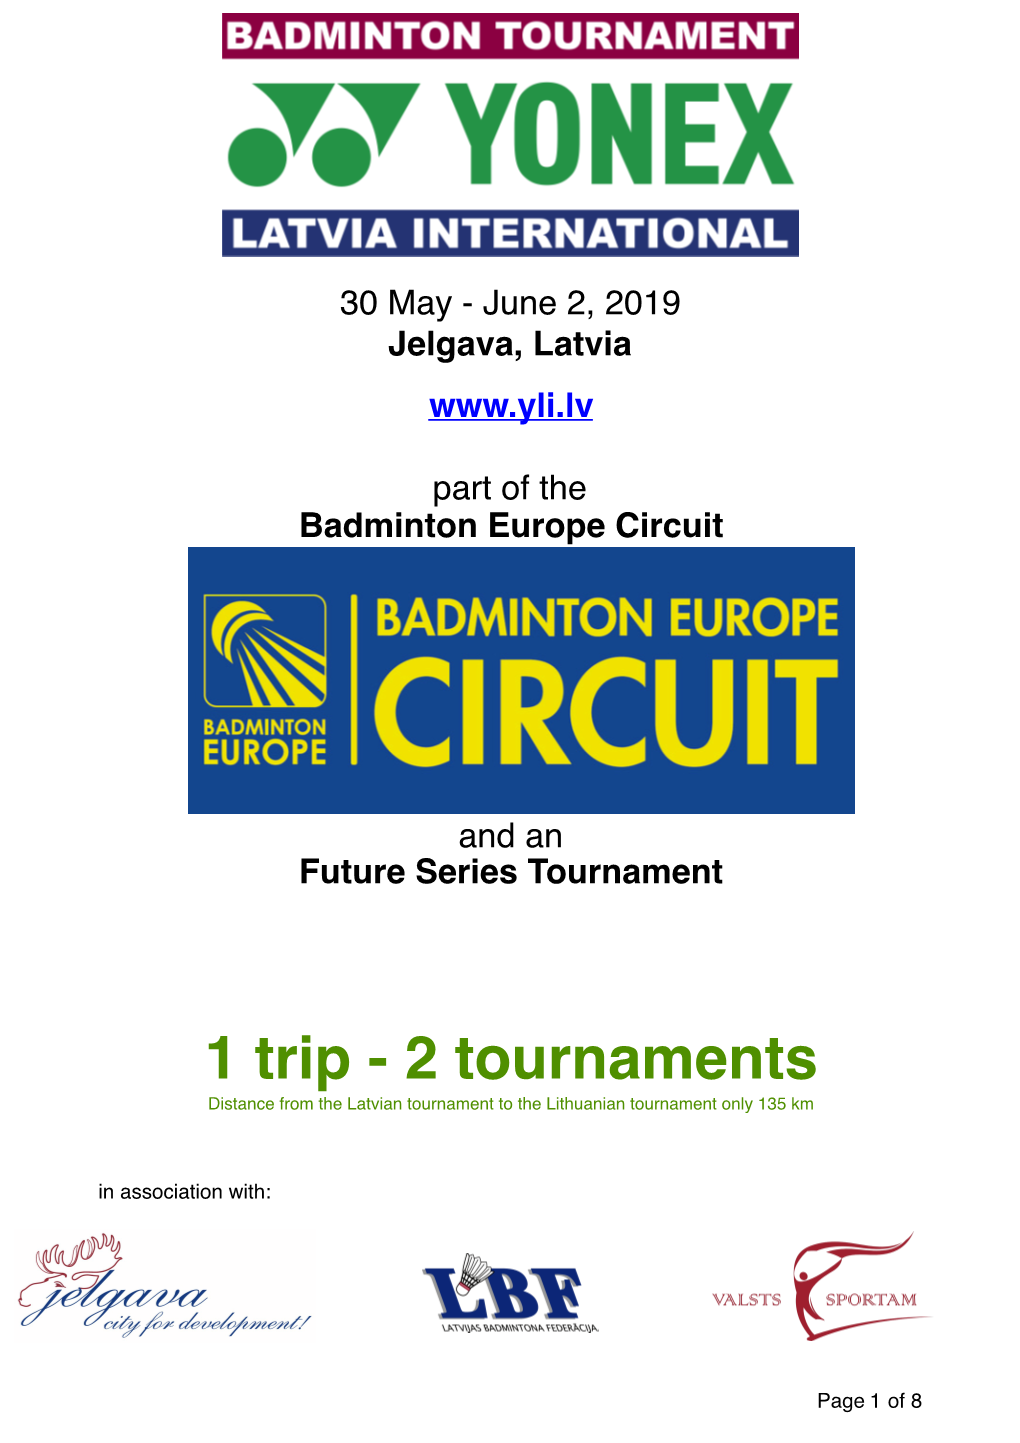 2 Tournaments Distance from the Latvian Tournament to the Lithuanian Tournament Only 135 Km